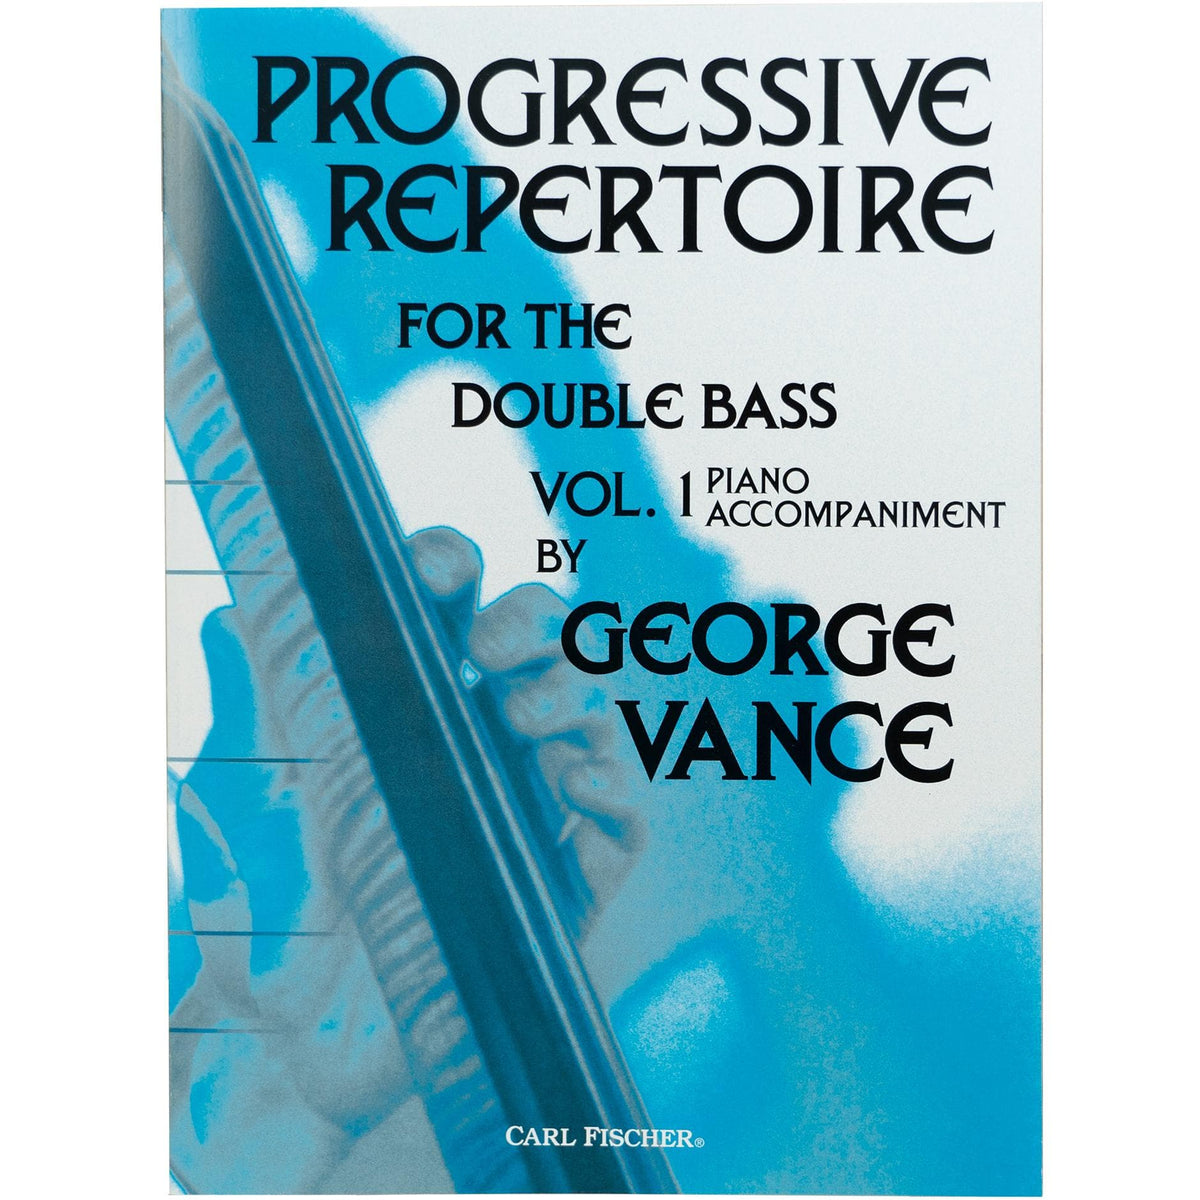 Progressive Repertoire for the Double Bass - Volume 1 Piano Accompaniment - by George Vance - Published by Carl Fischer